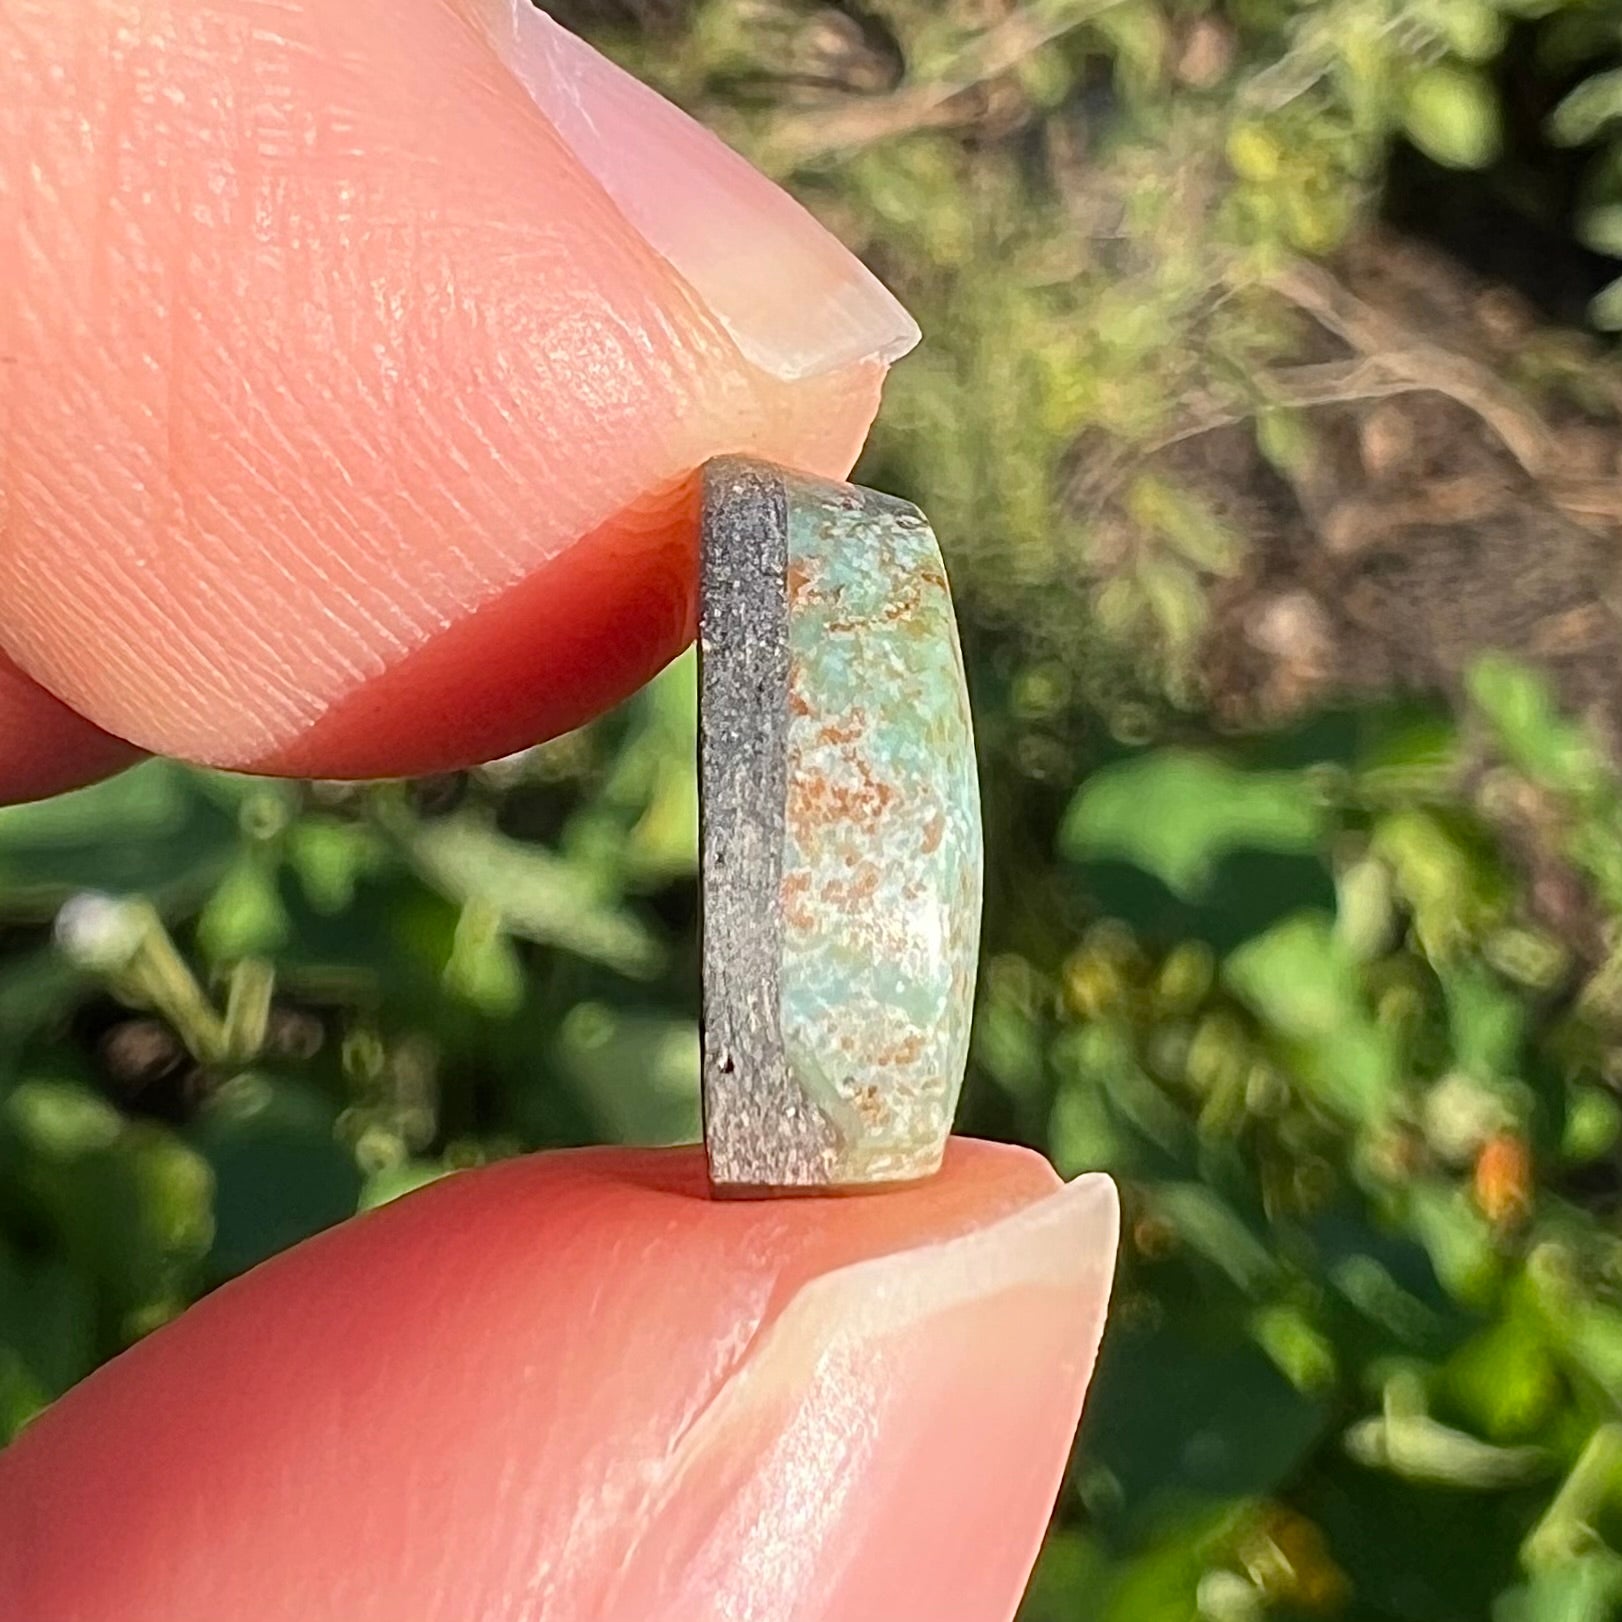 A loose, off-round cabochon cut turquoise stone.  The stone is light blue with a red webbed matrix.